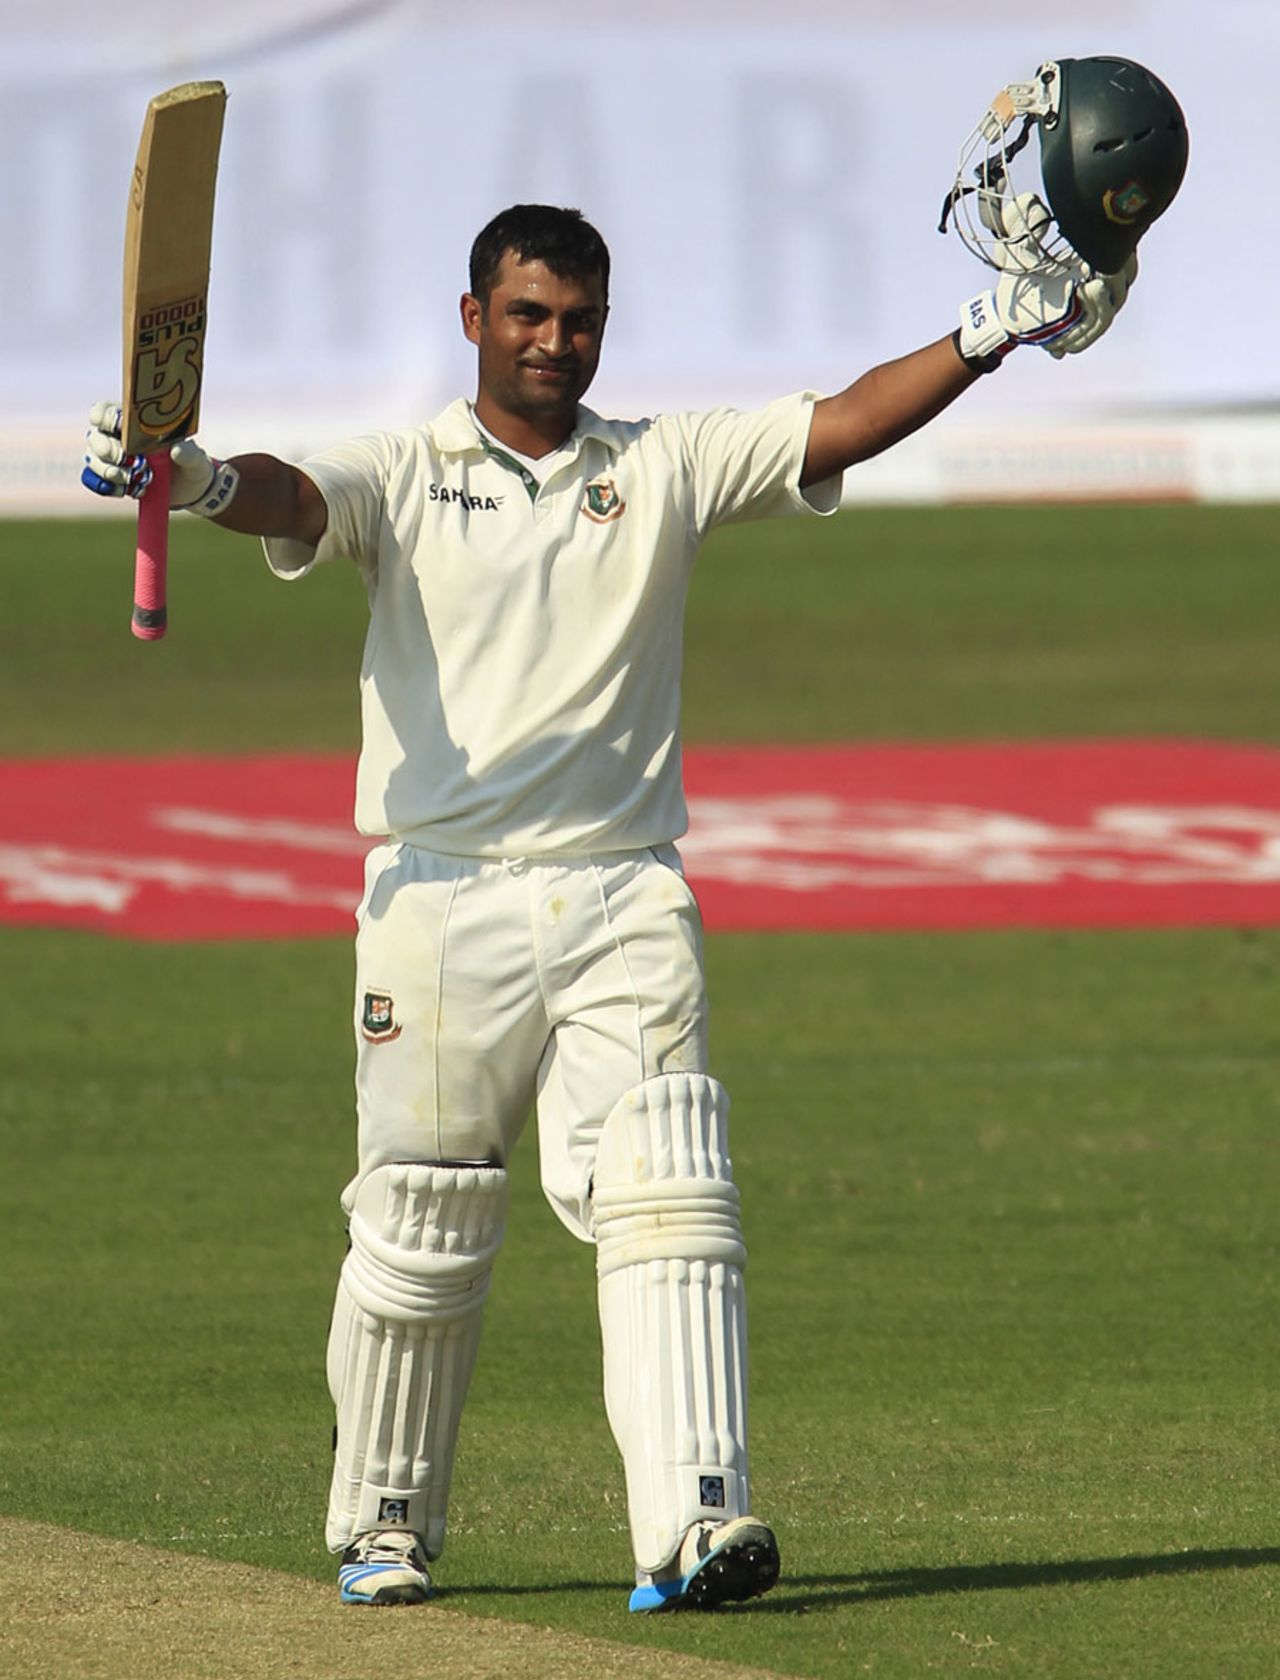 Tamim Iqbal hit his second century in two Tests, Bangladesh v Zimbabwe, 3rd Test, 1st day, Chittagong, November 12, 2014